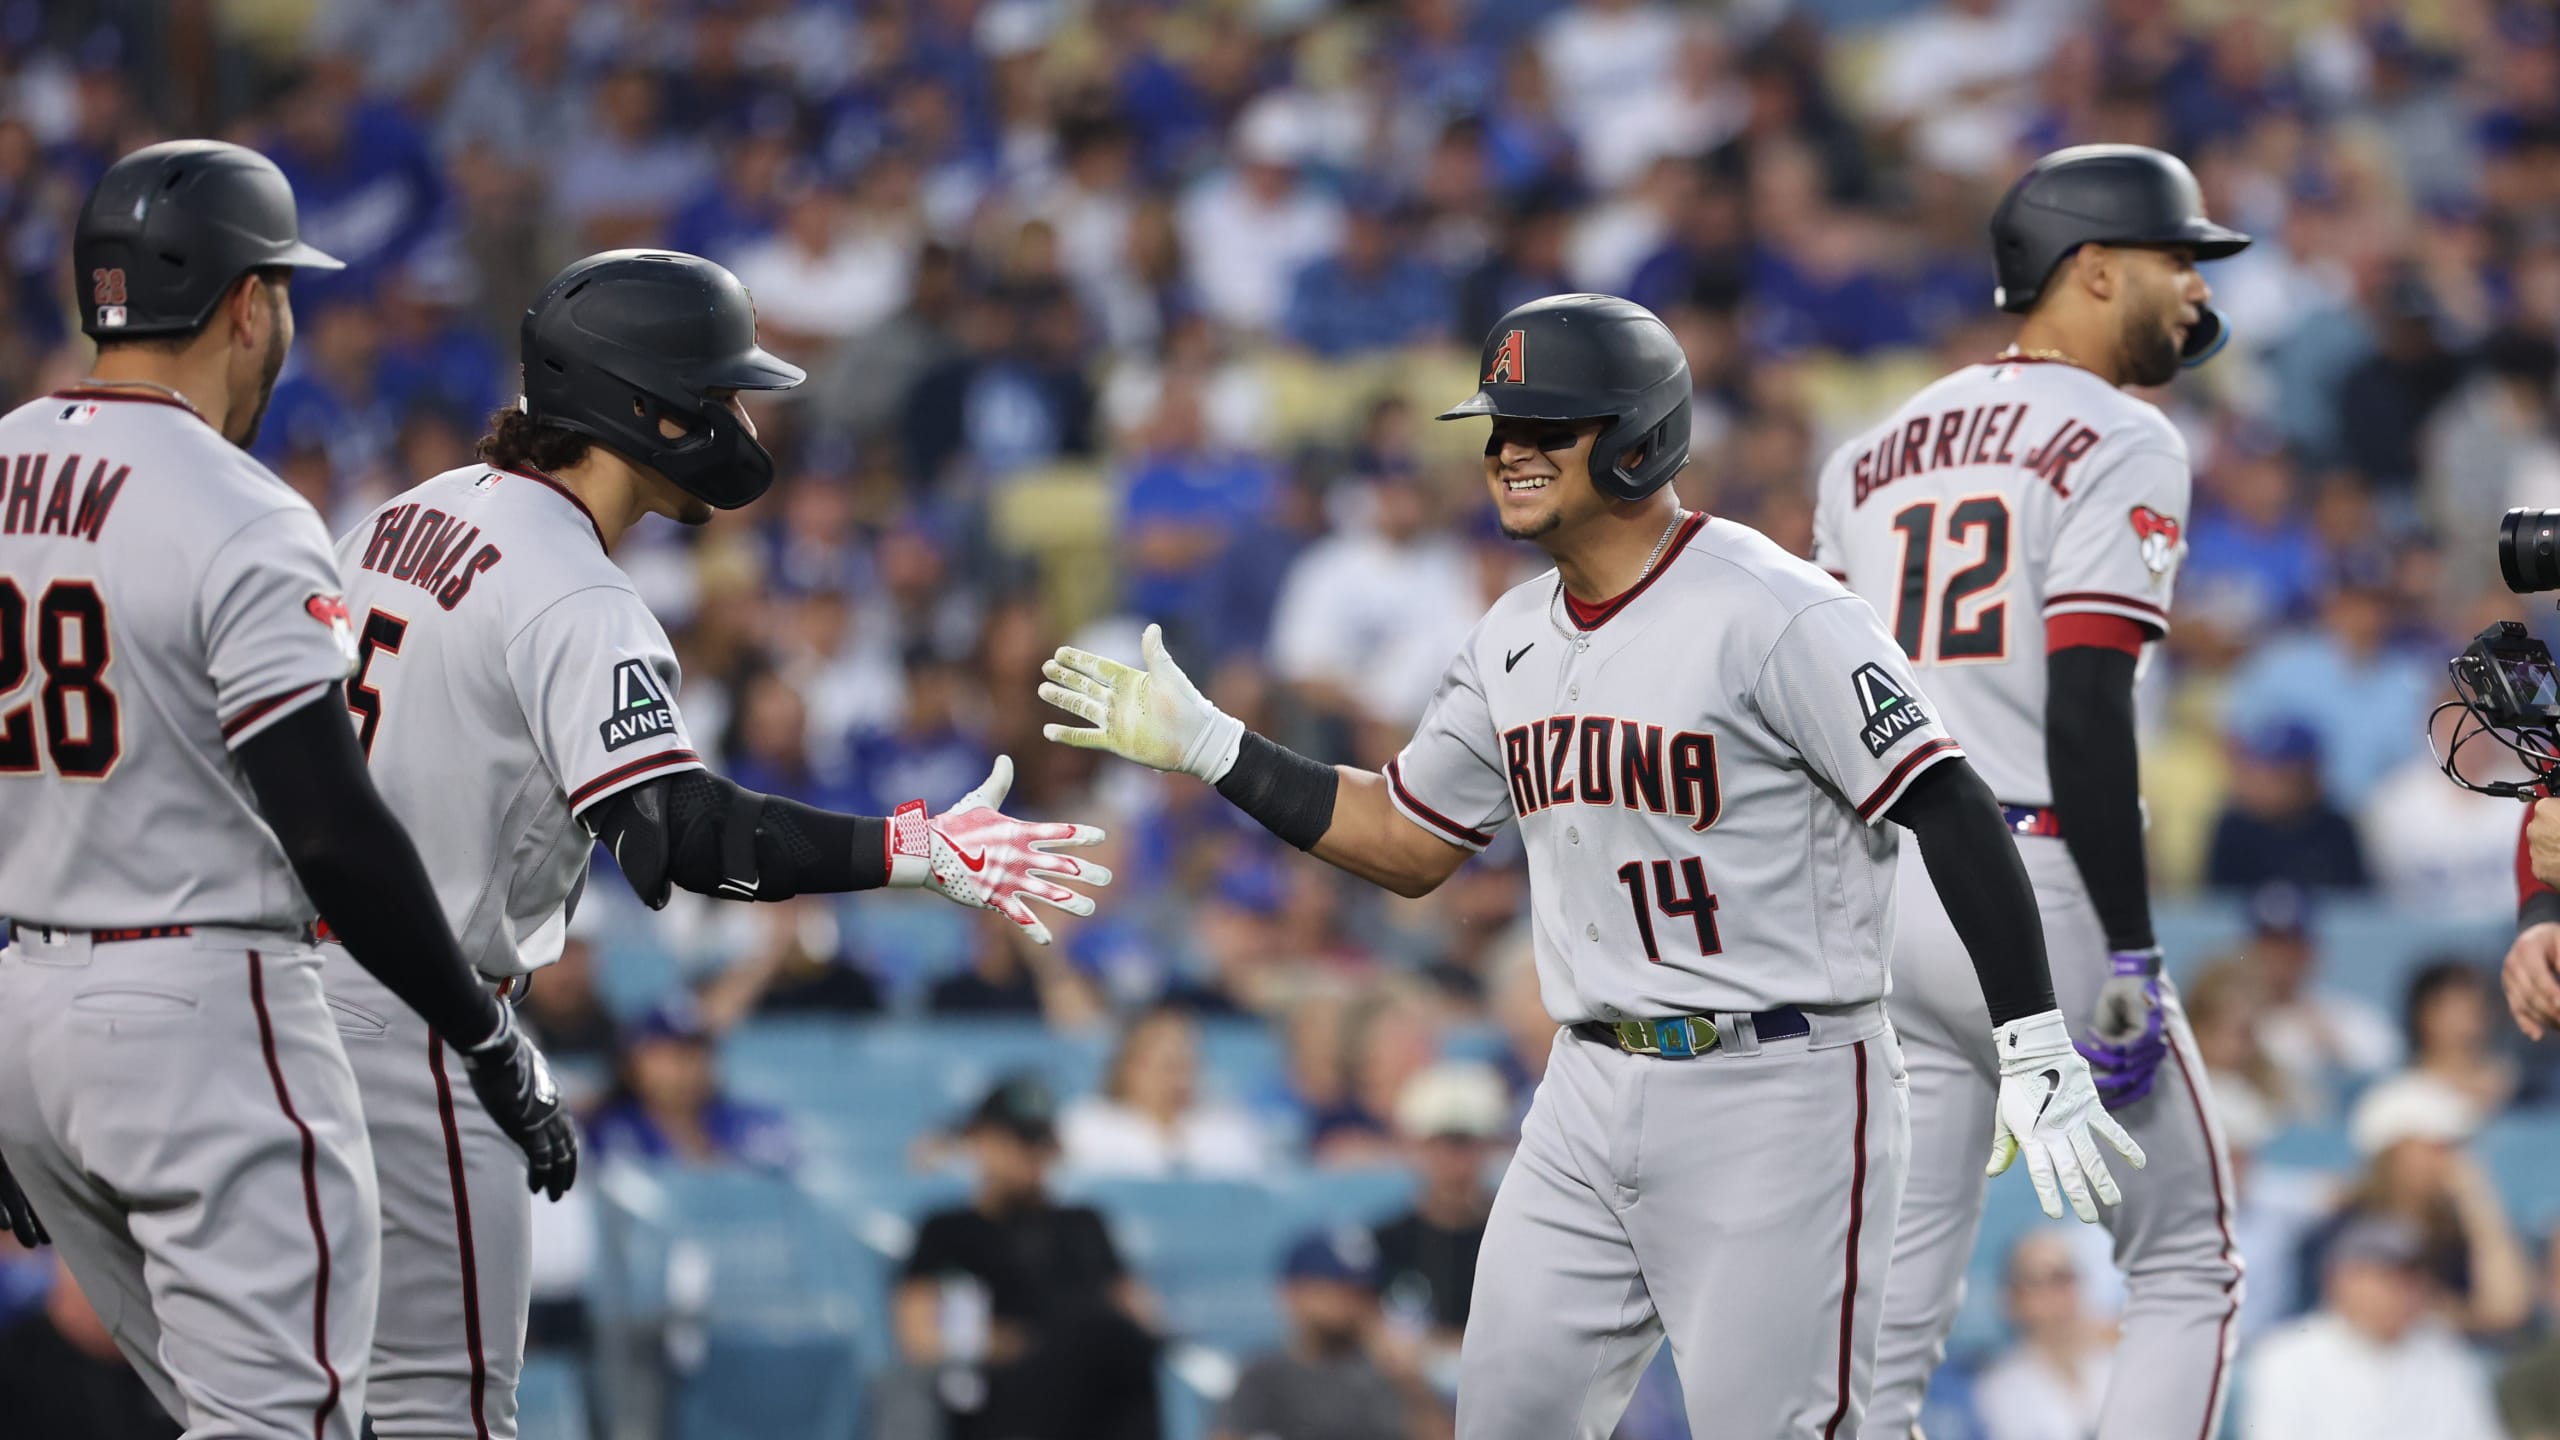 Giants beat Dodgers in historic rout at Dodger Stadium